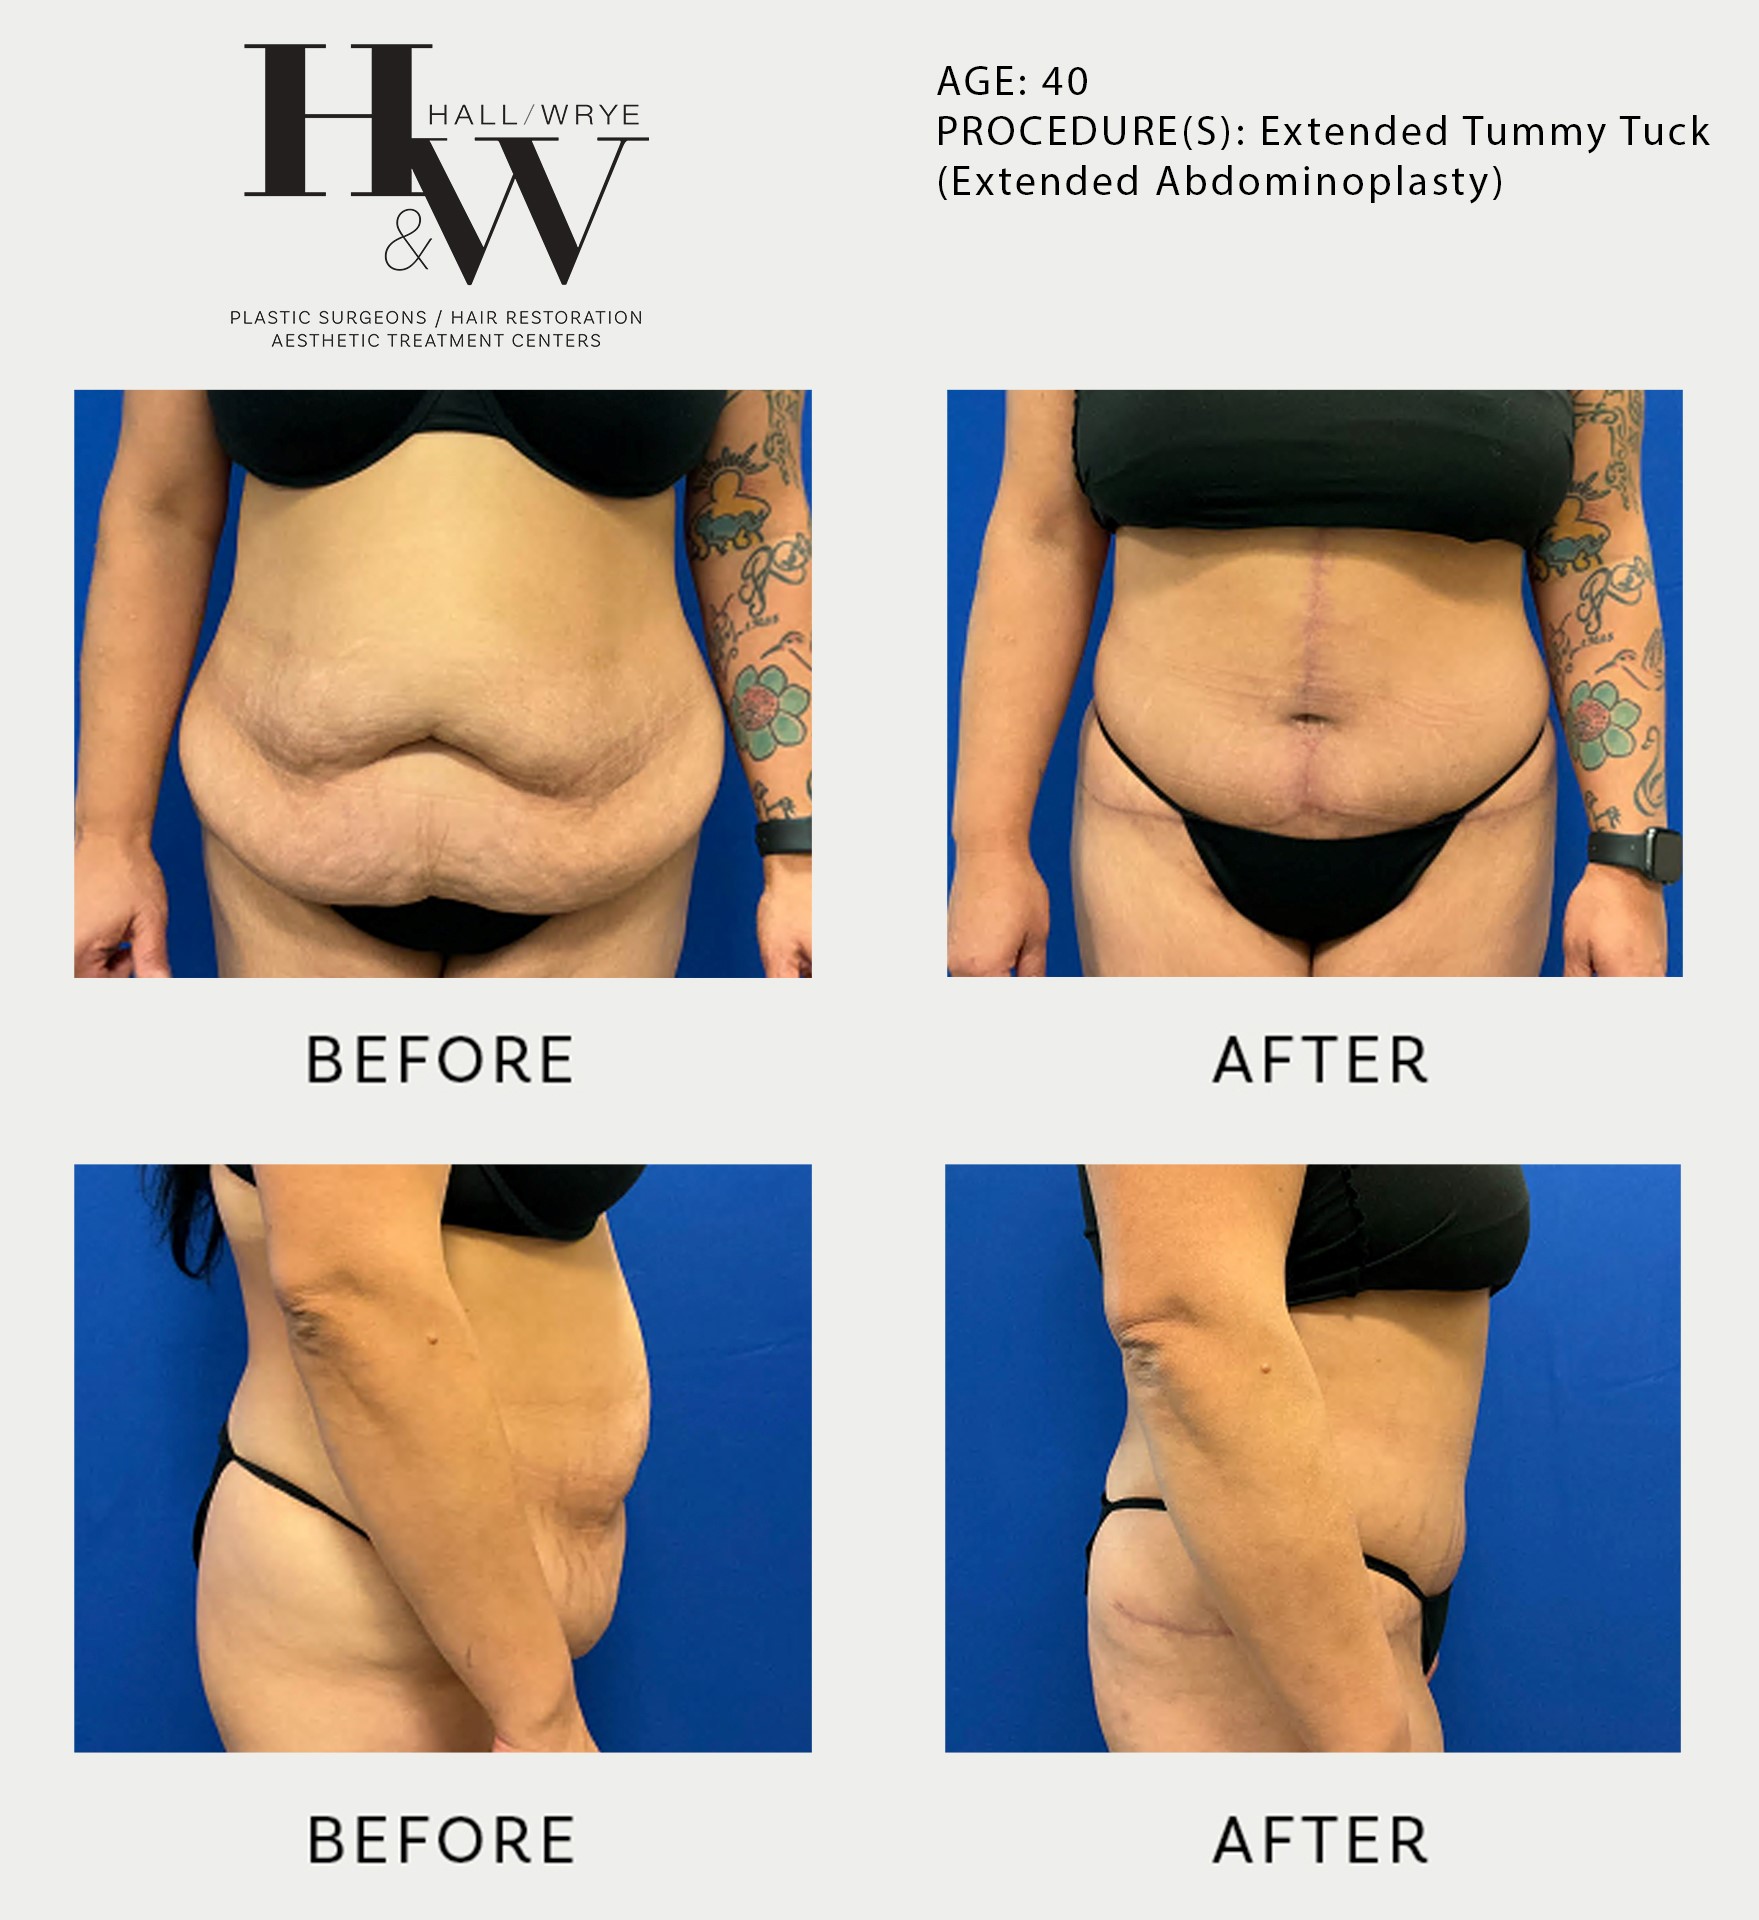 TUMMY TUCK (ABDOMINOPLASTY) - Hall & Wrye – Plastic Surgery and Medical Spa  in Reno NV, Breast Implants and Breast Augmentation, Liposuction, Tummy-Tucks,  Dermal Fillers, Hair Transplants and more! Licensed Reno Plastic